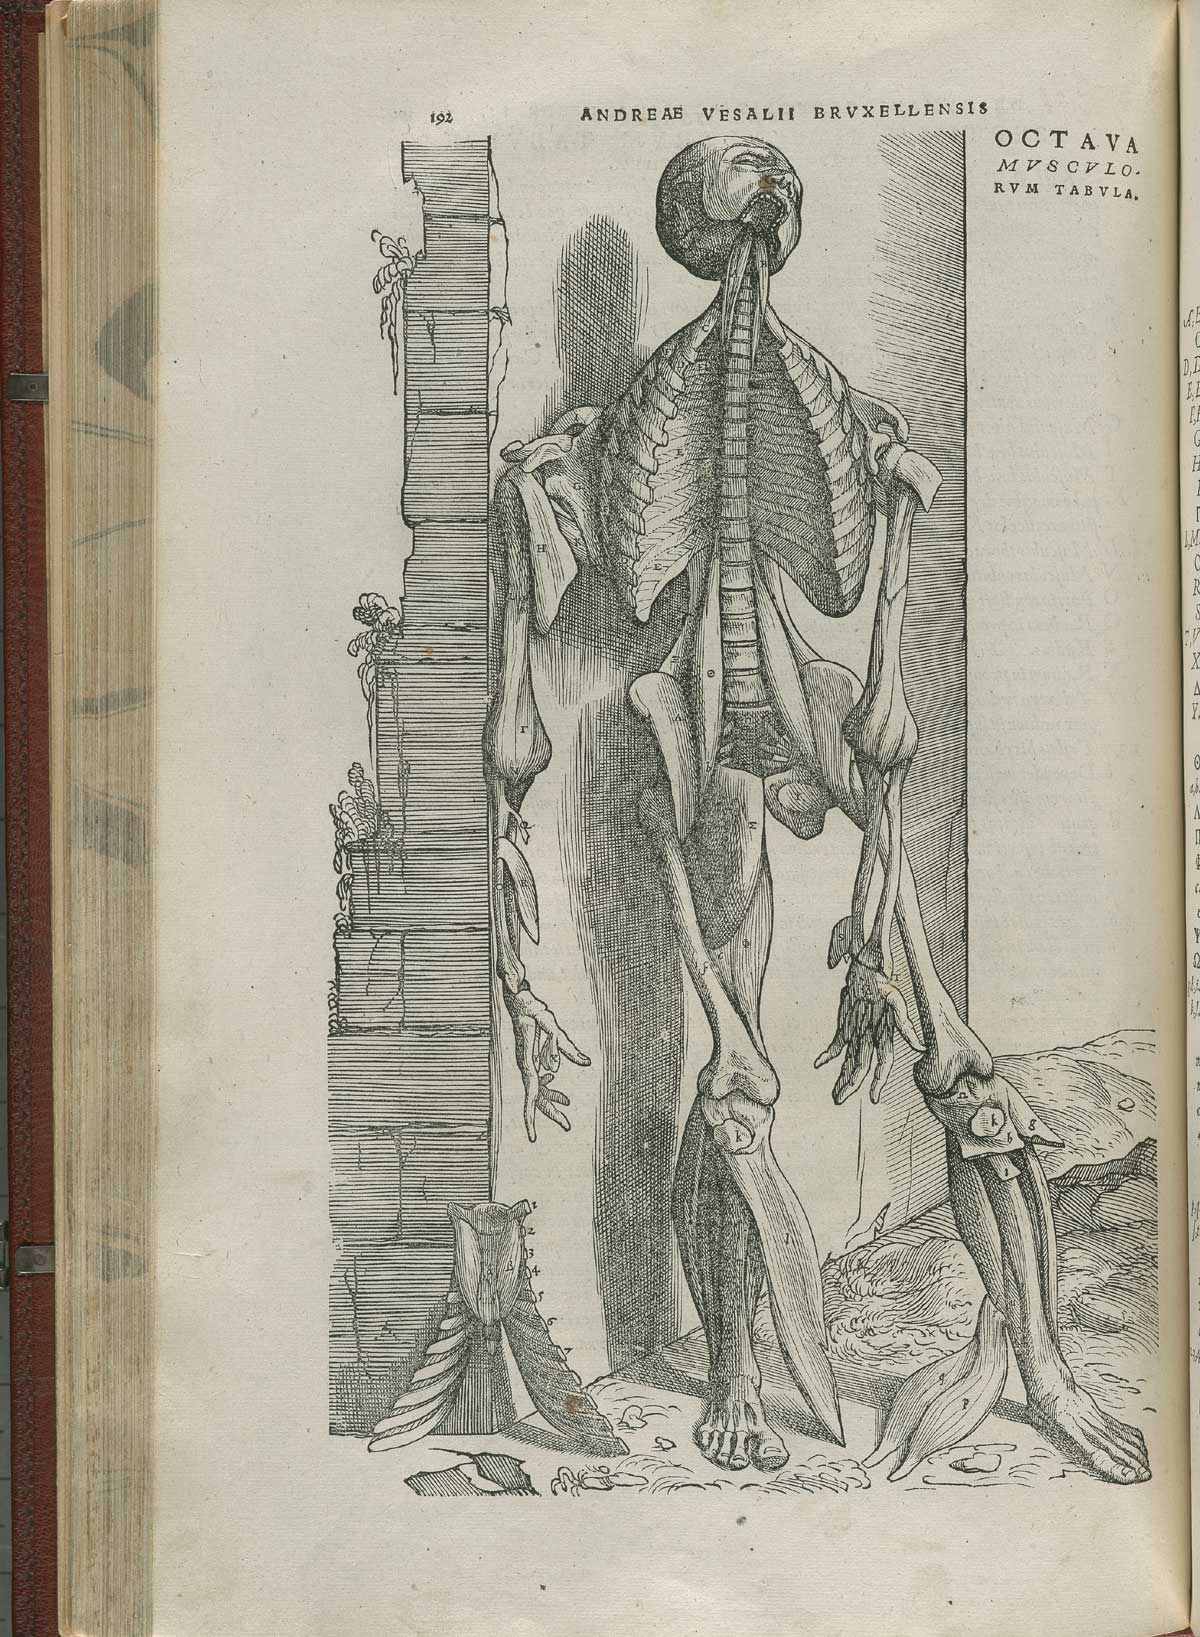 Page 192 of Andreas Vesalius' De corporis humani fabrica libri septem, featuring the illustrated woodcut of the eighth muscle plate, a full-length frontal view of a flayed corpse leaning against a wall, very little muscle is left on the body.